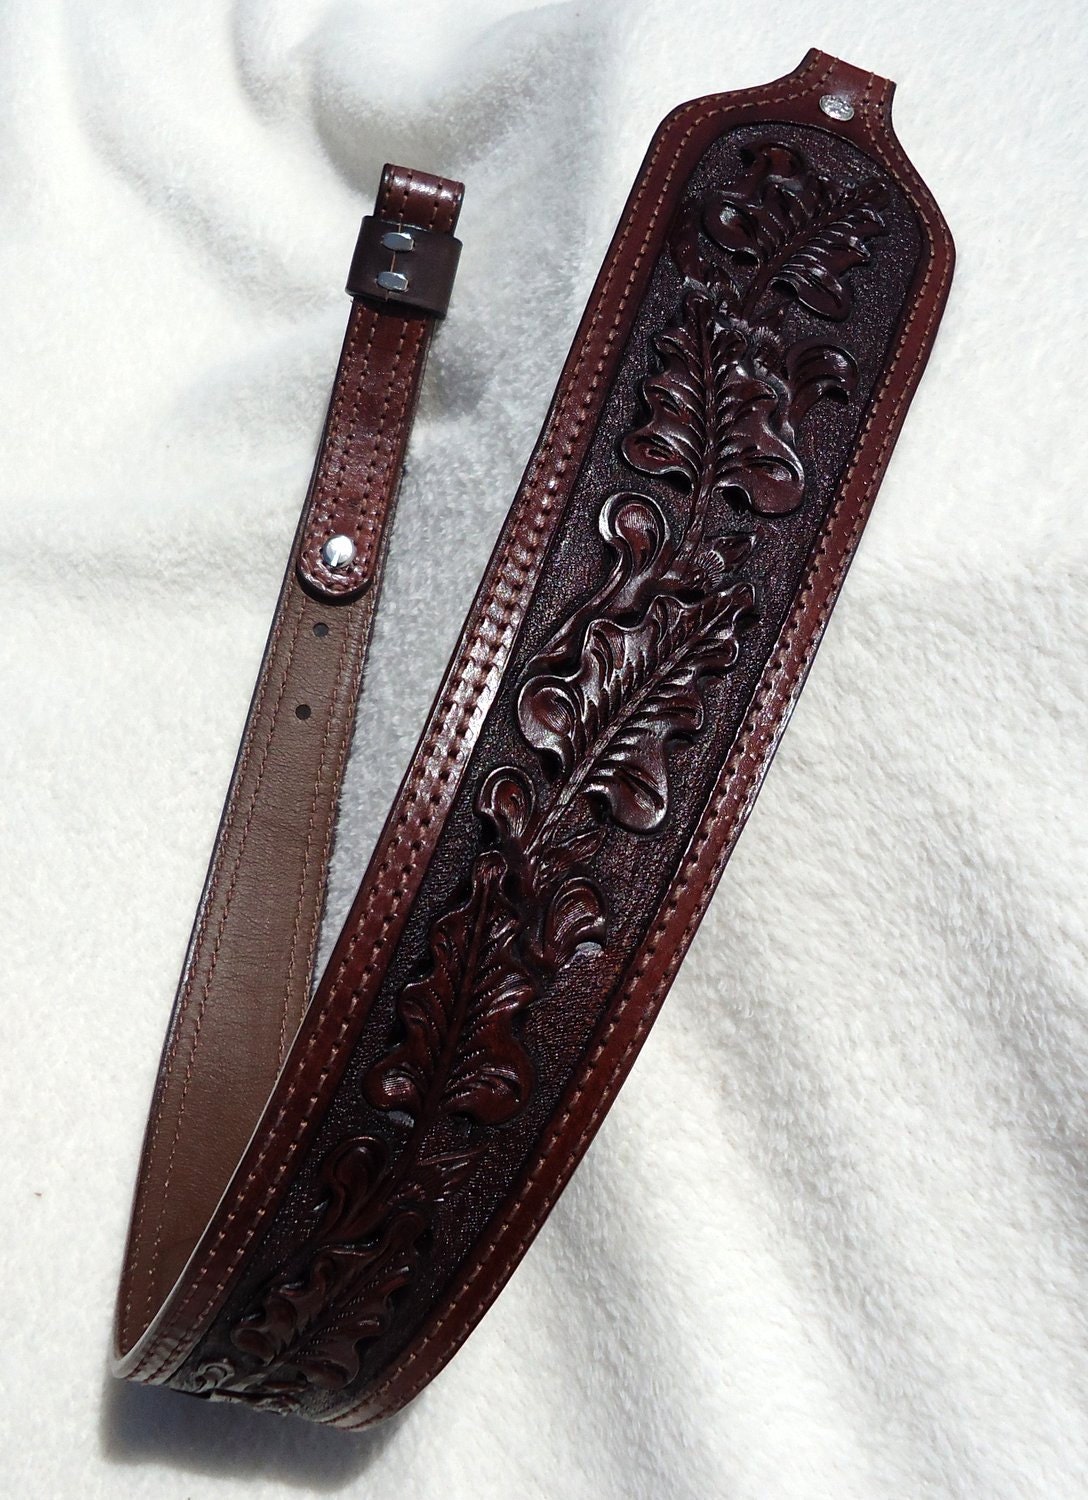 Handmade Leather Rifle Sling With Padded by texascustomcrafts